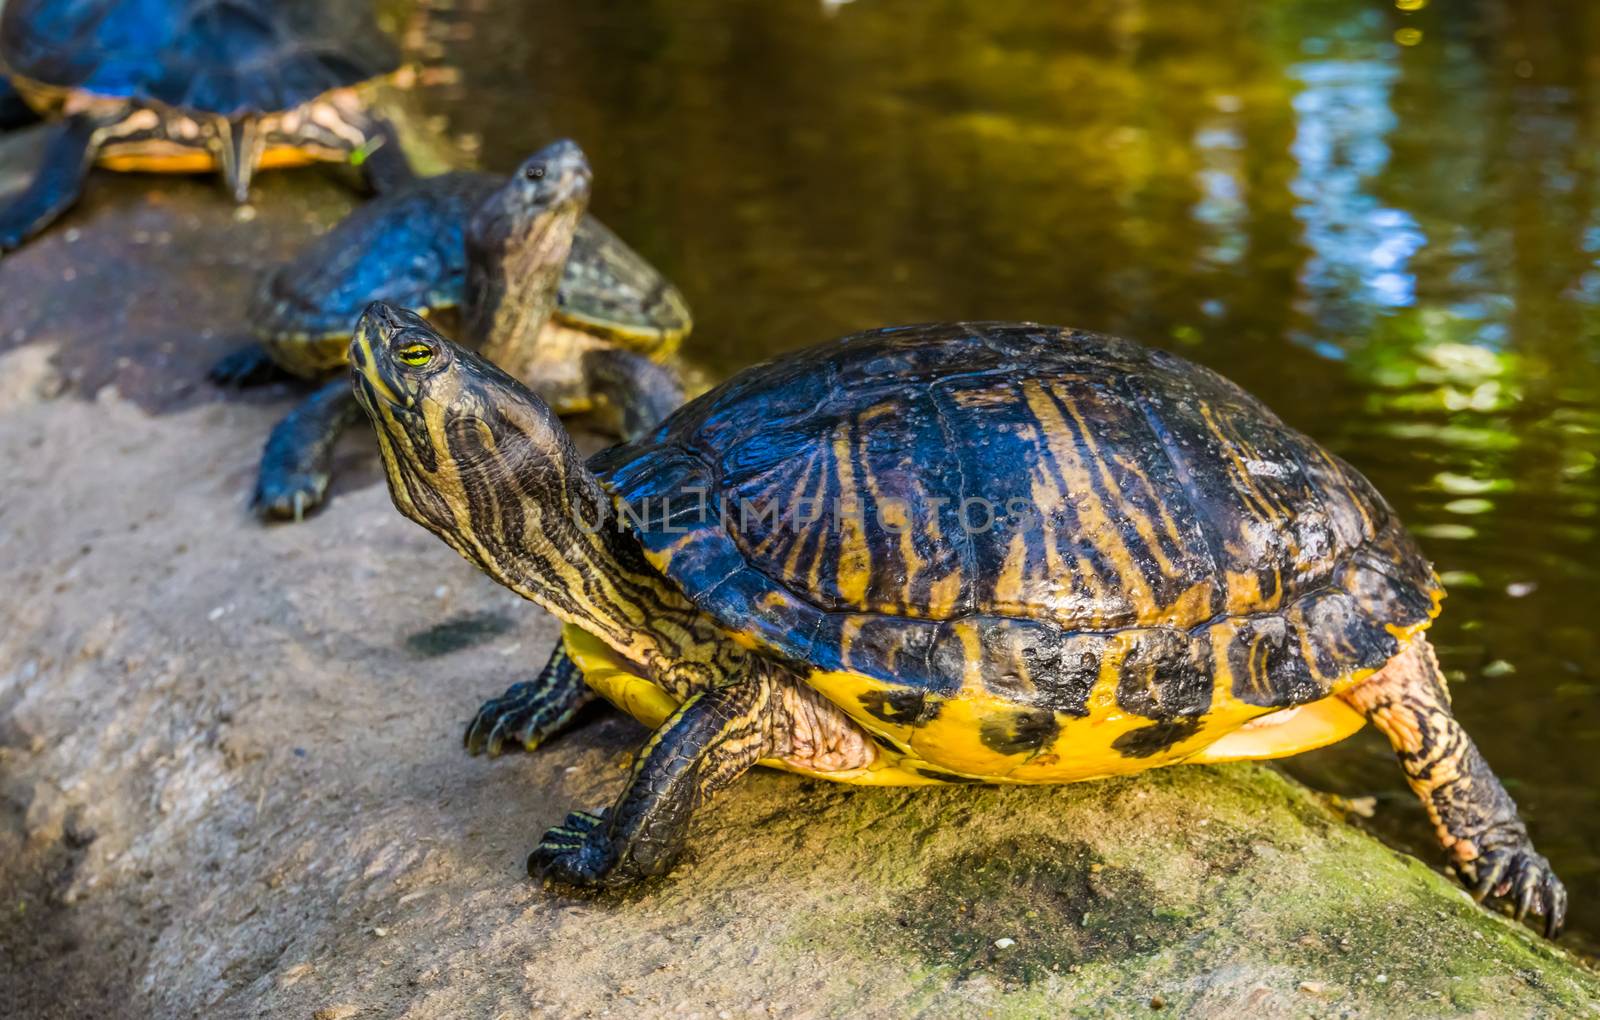 closeup portrait of a yellow bellied cumberland slider turtle, tropical reptile specie from America